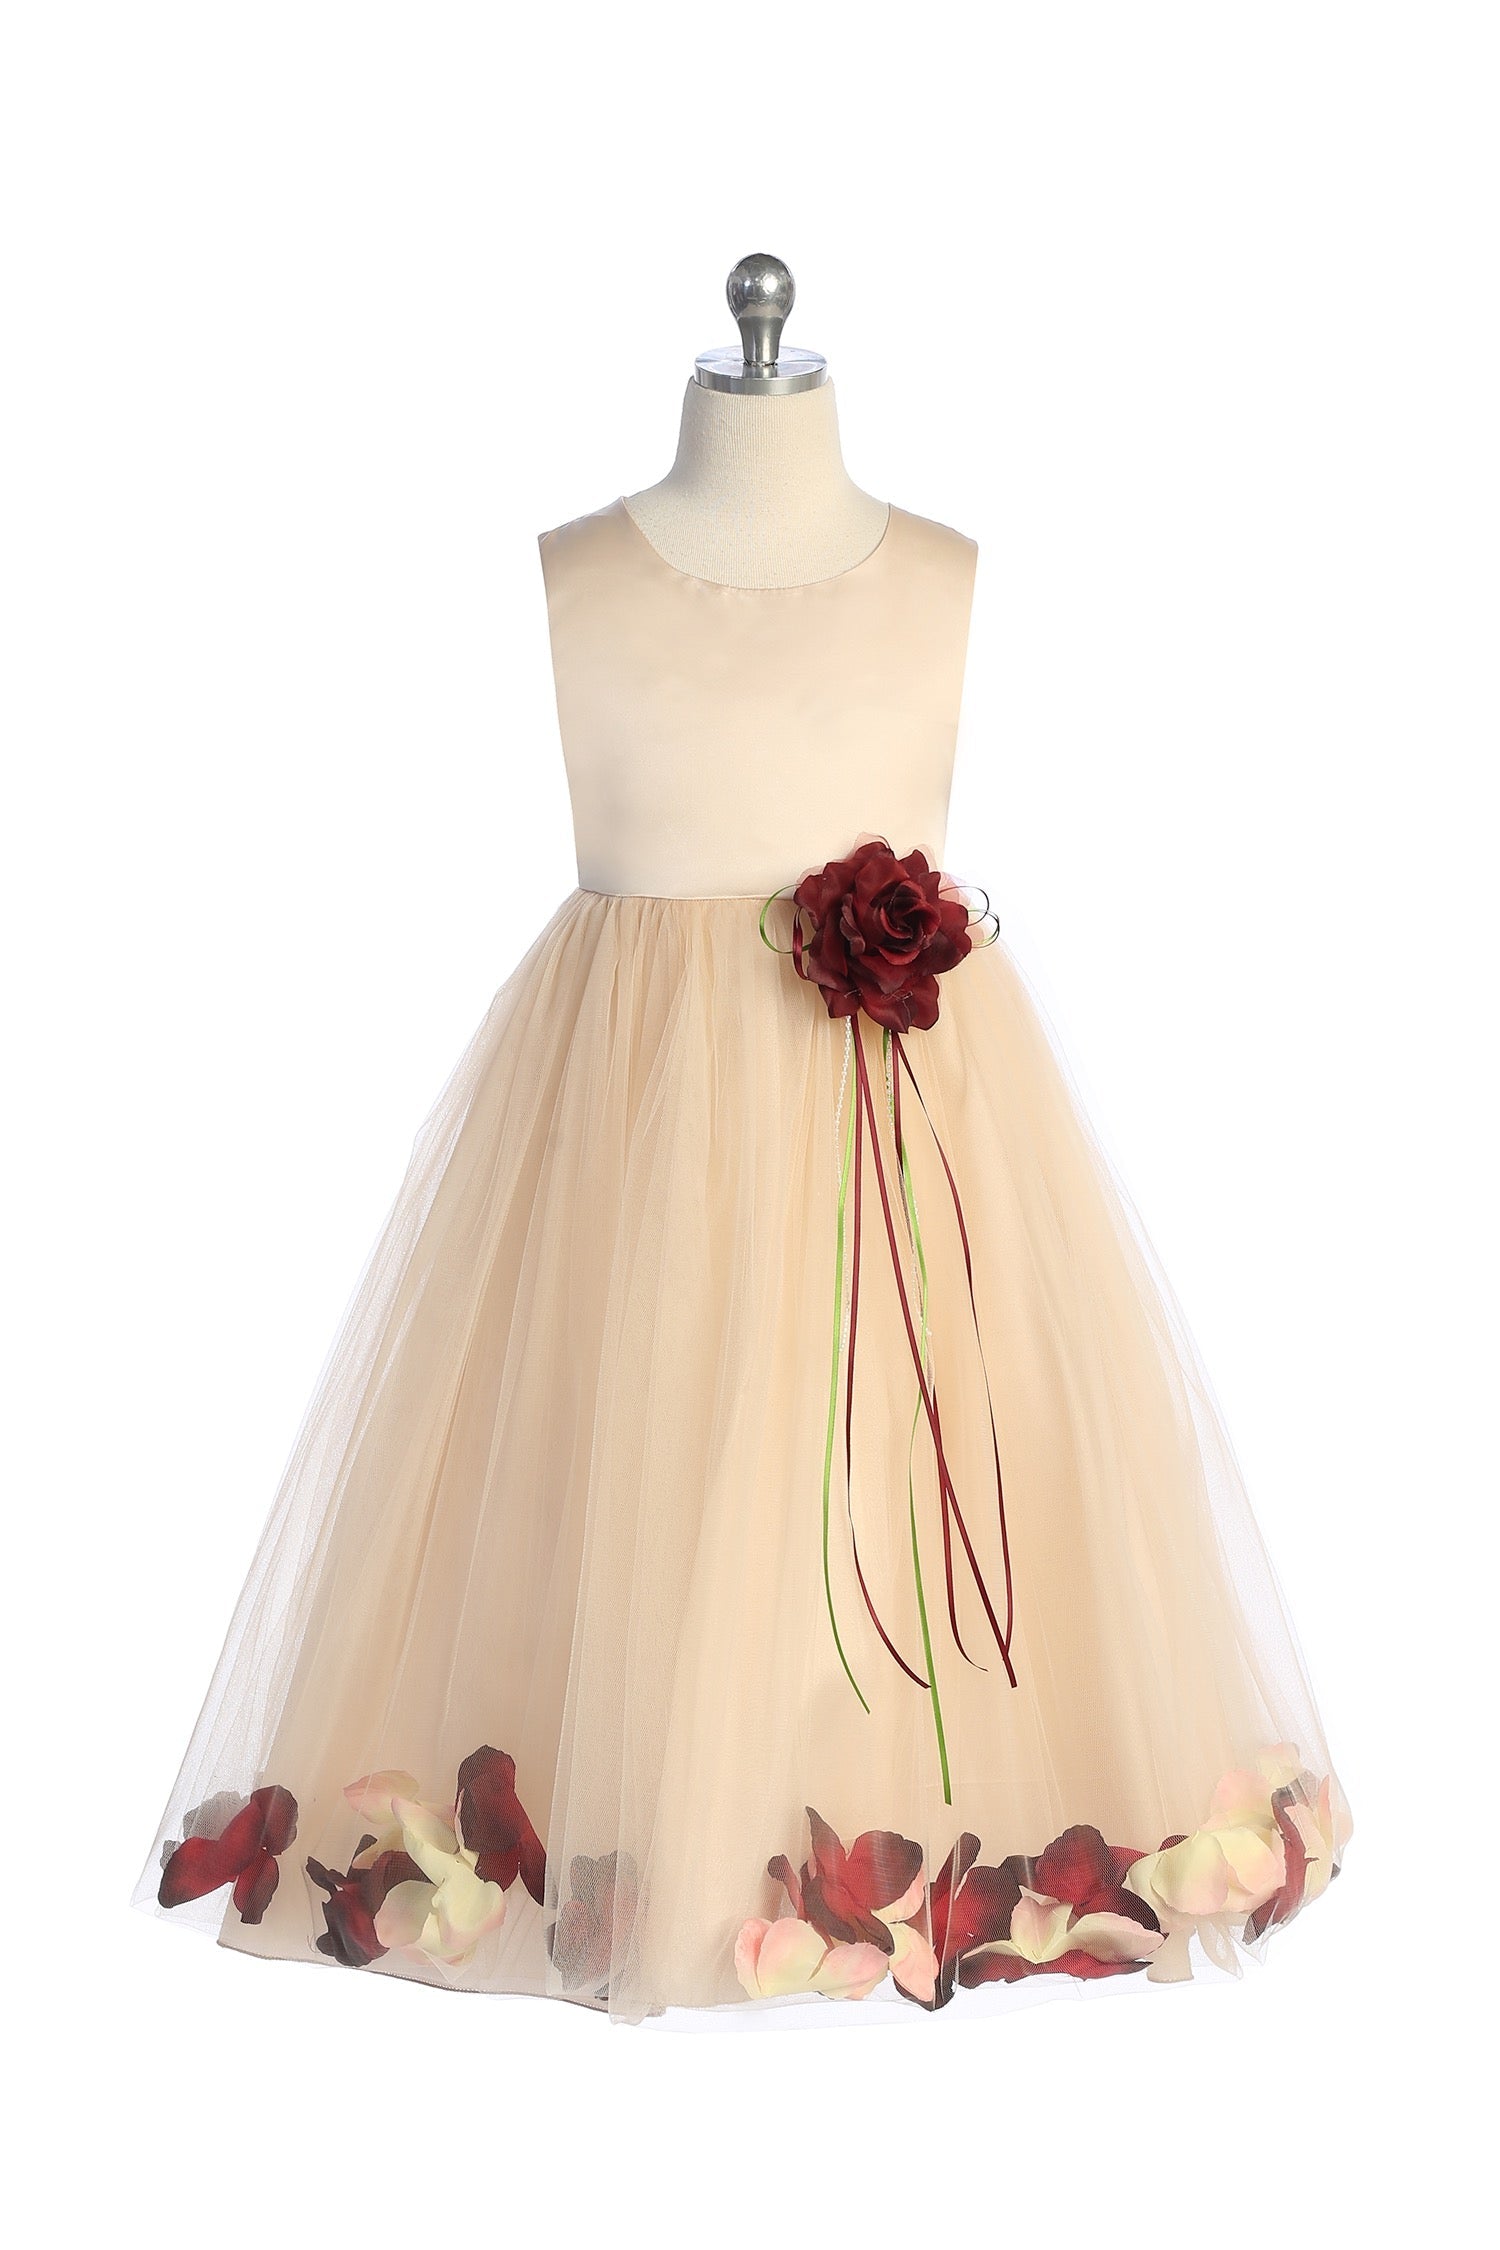 452-A Capped Sleeve Satin & Tulle Girls Dress with Rhinestone Trim and –  Kid's Dream Wholesale